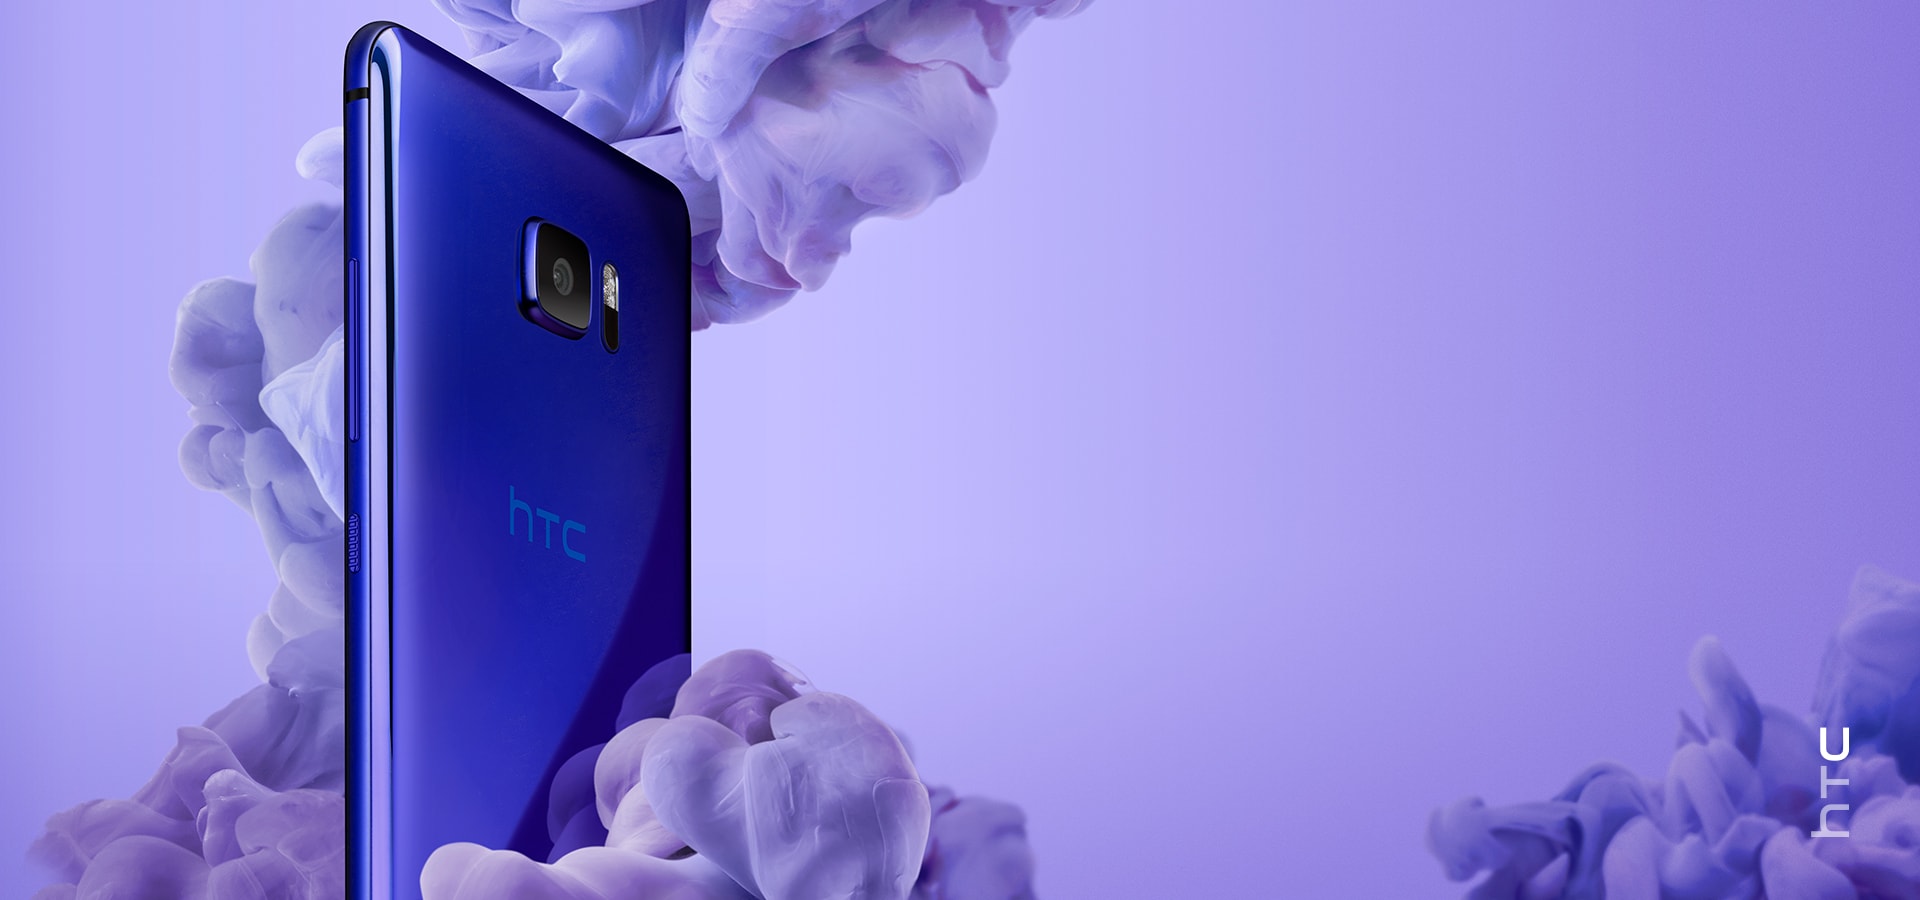 htc u ultra PDP Hero - for some reason we don't have an alt tag here